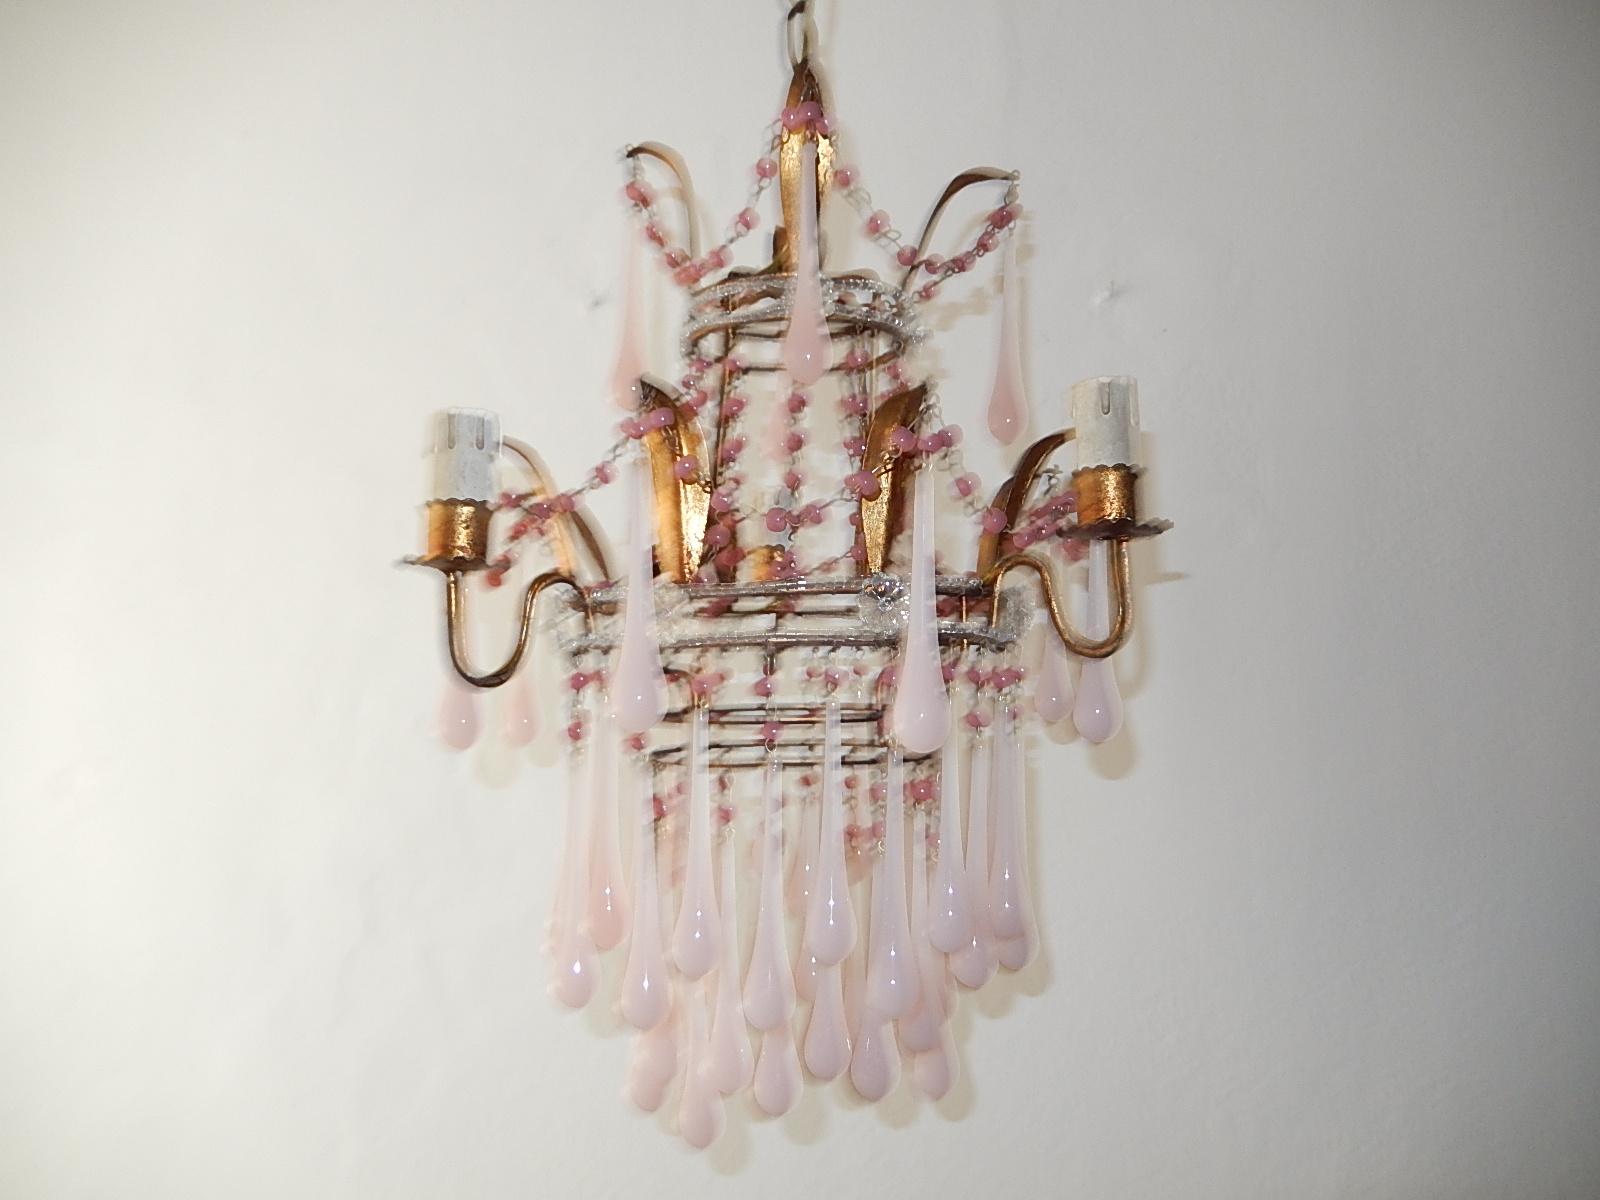 Housing 3 lights, will be rewired with certified UL US sockets for the USA and certified sockets for other countries and ready to hang. Gilt metal body with tiny beading and florets. Gilt metal with swags of pink opaline Murano beads and drops.